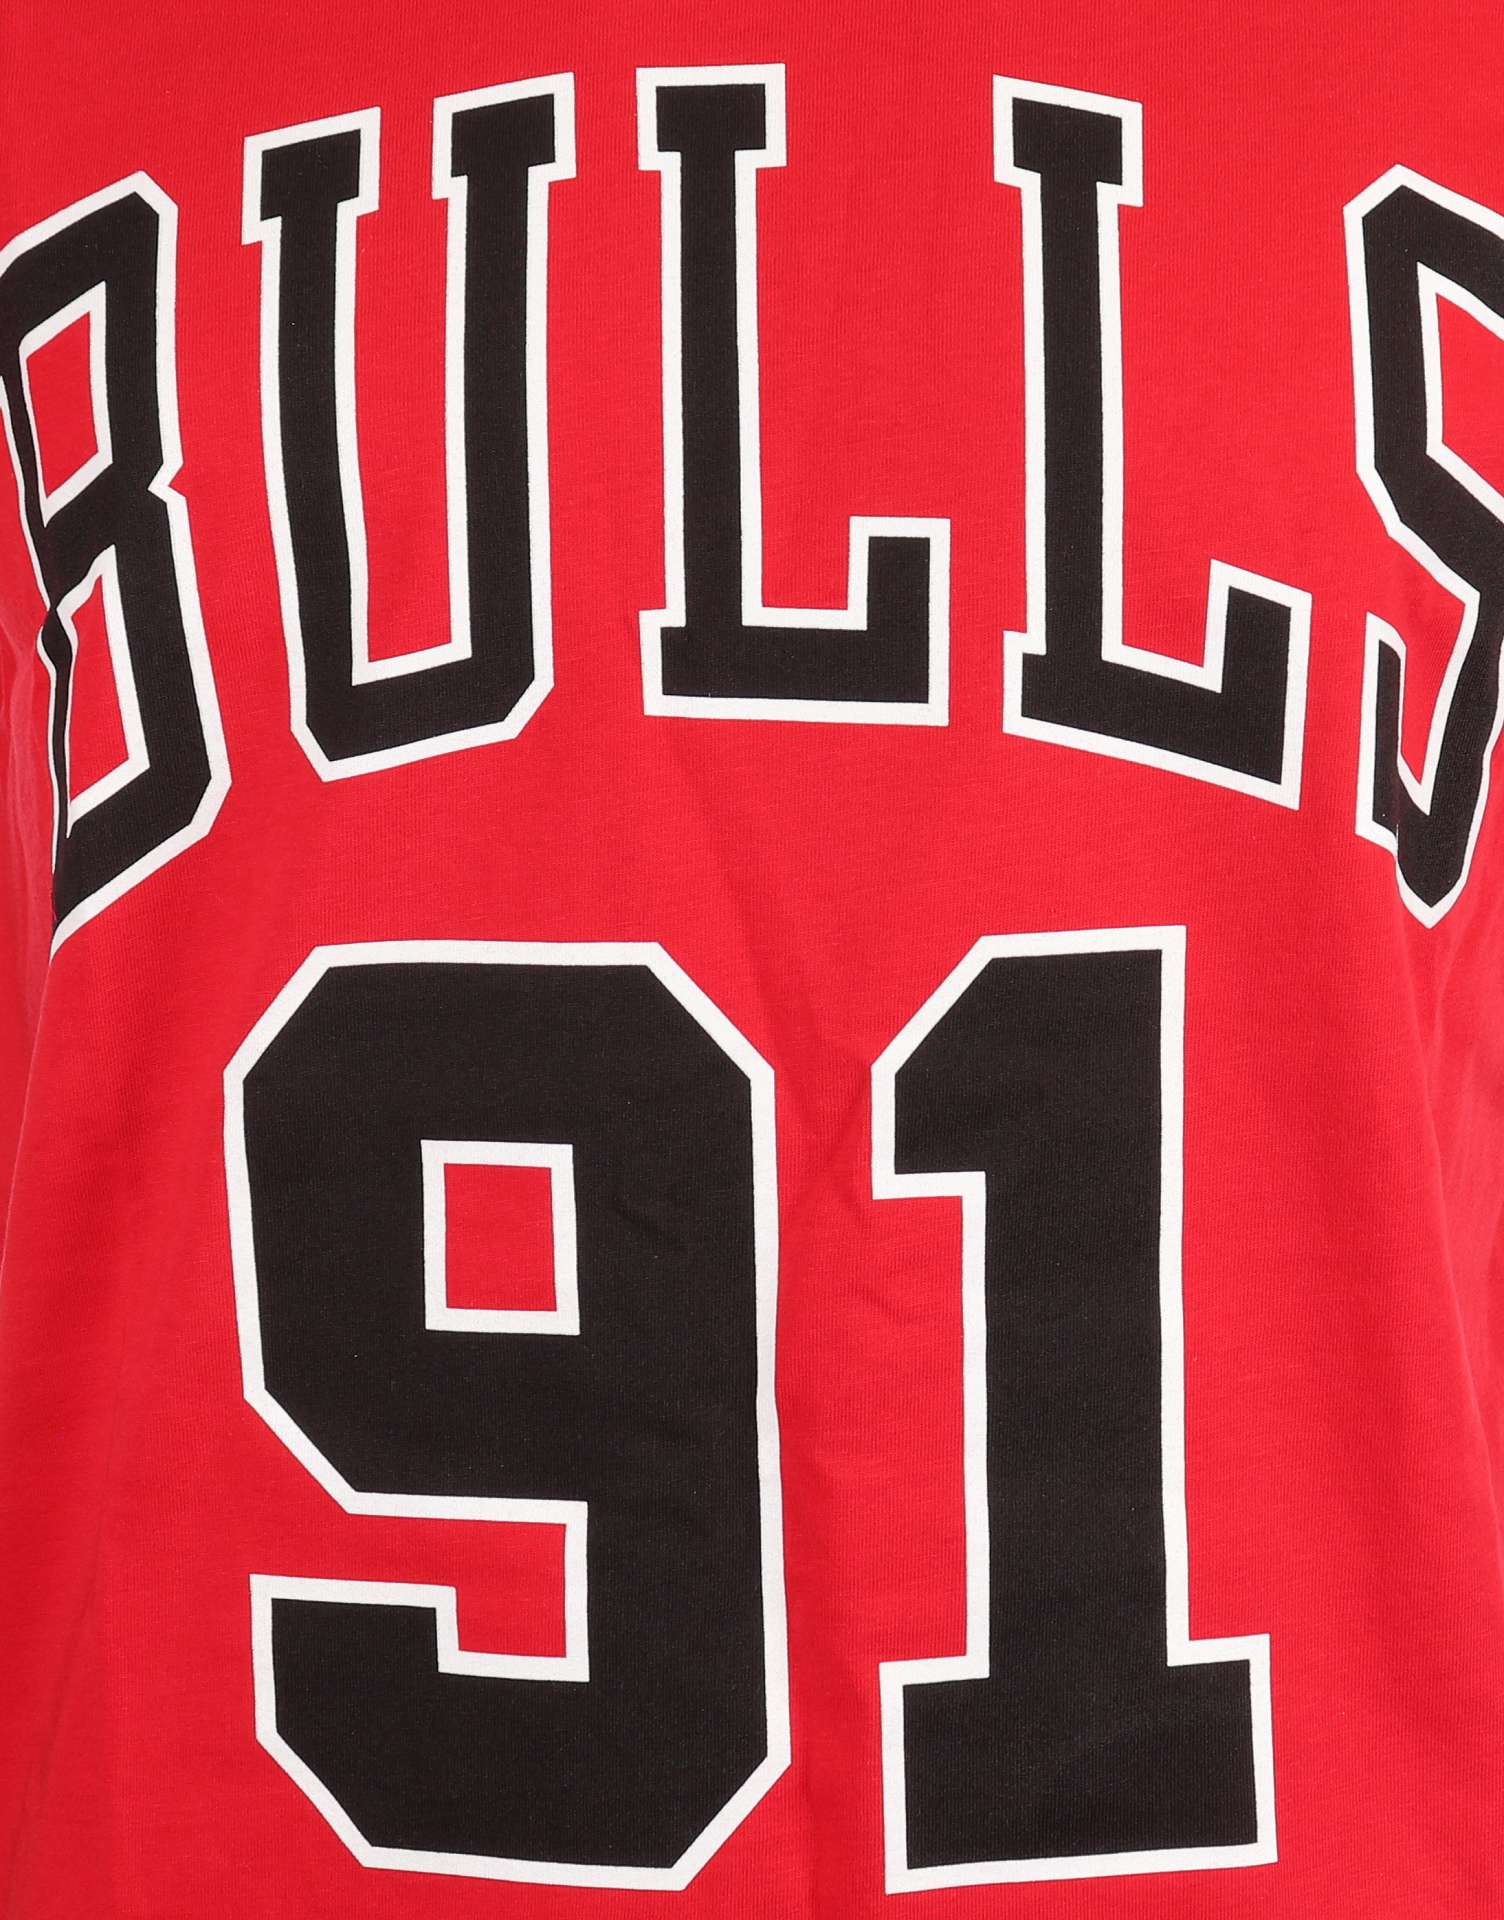 Dennis Rodman #91 Chicago Bulls Red NBA Name and Number Tee T-Shirt Mitchell & Ness